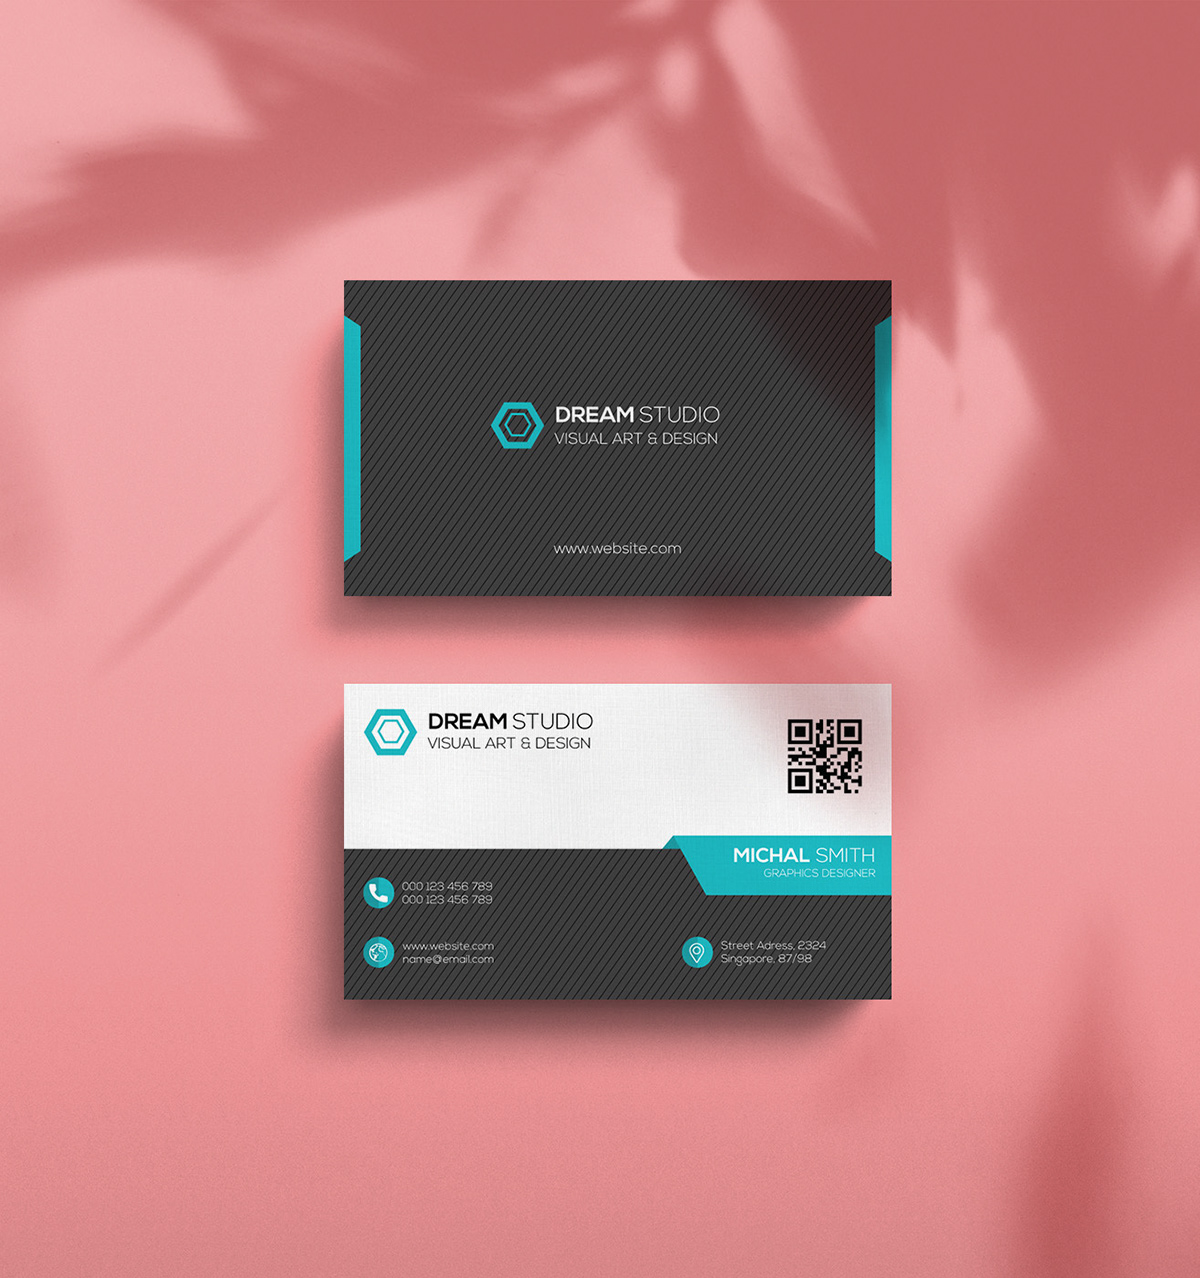 business card Business card design visiting card visiting card design id card business card card design Business Cards Corporate Identity